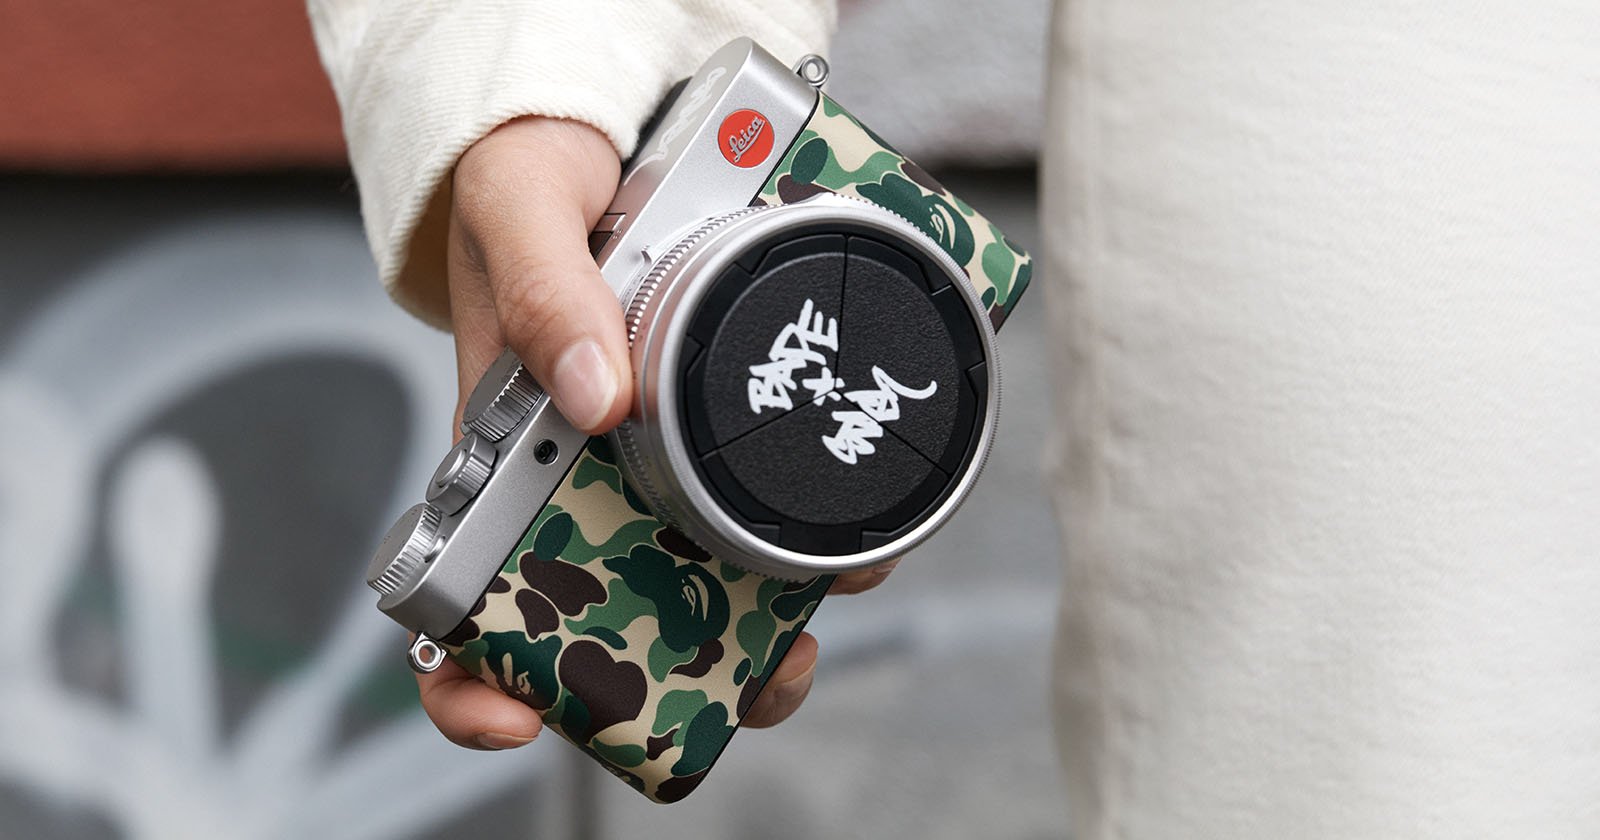 Leica D-Lux 7 007 Edition